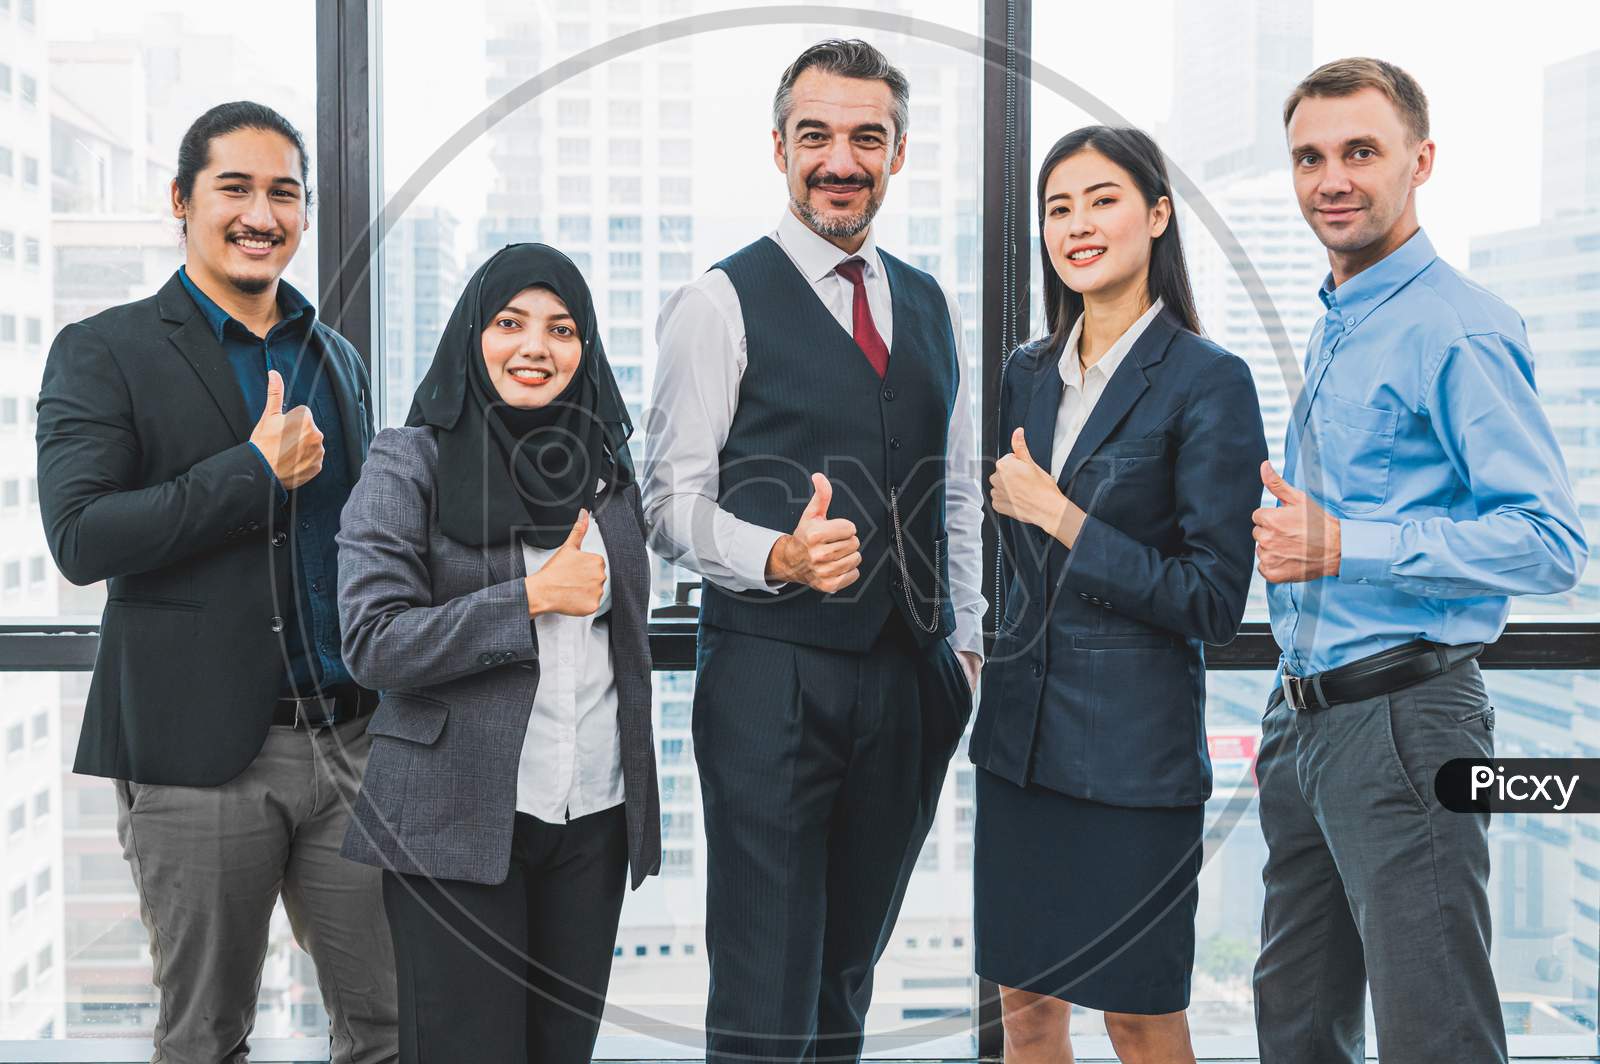 Portrait Of Business People Group Having Confident In Successful Job In Modern Office Background. People Lifestyle And Partnership Colleague Concept. Teamwork And Cooperation Diversity And Multi-Ethics